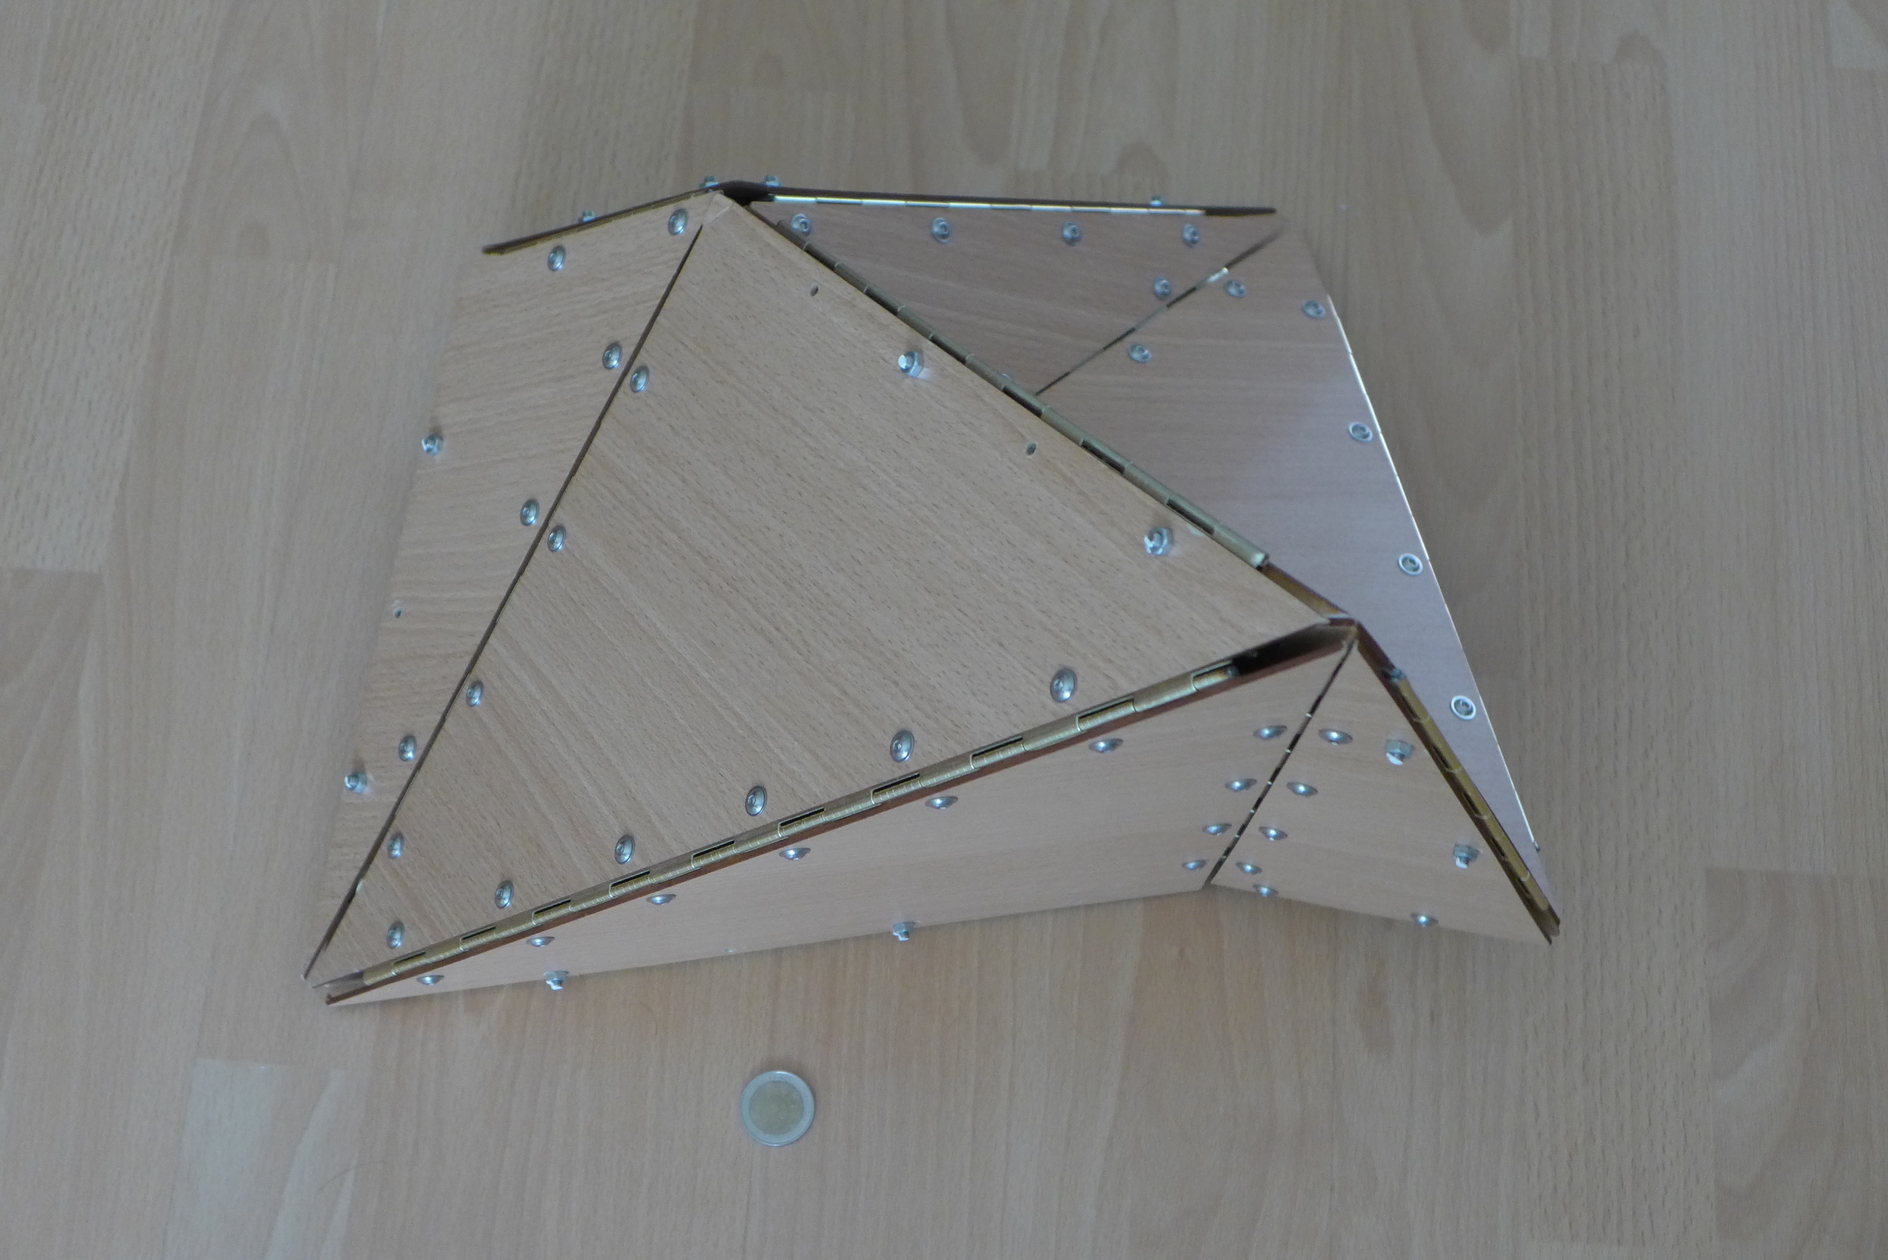 View 3 of the big polyhedron model